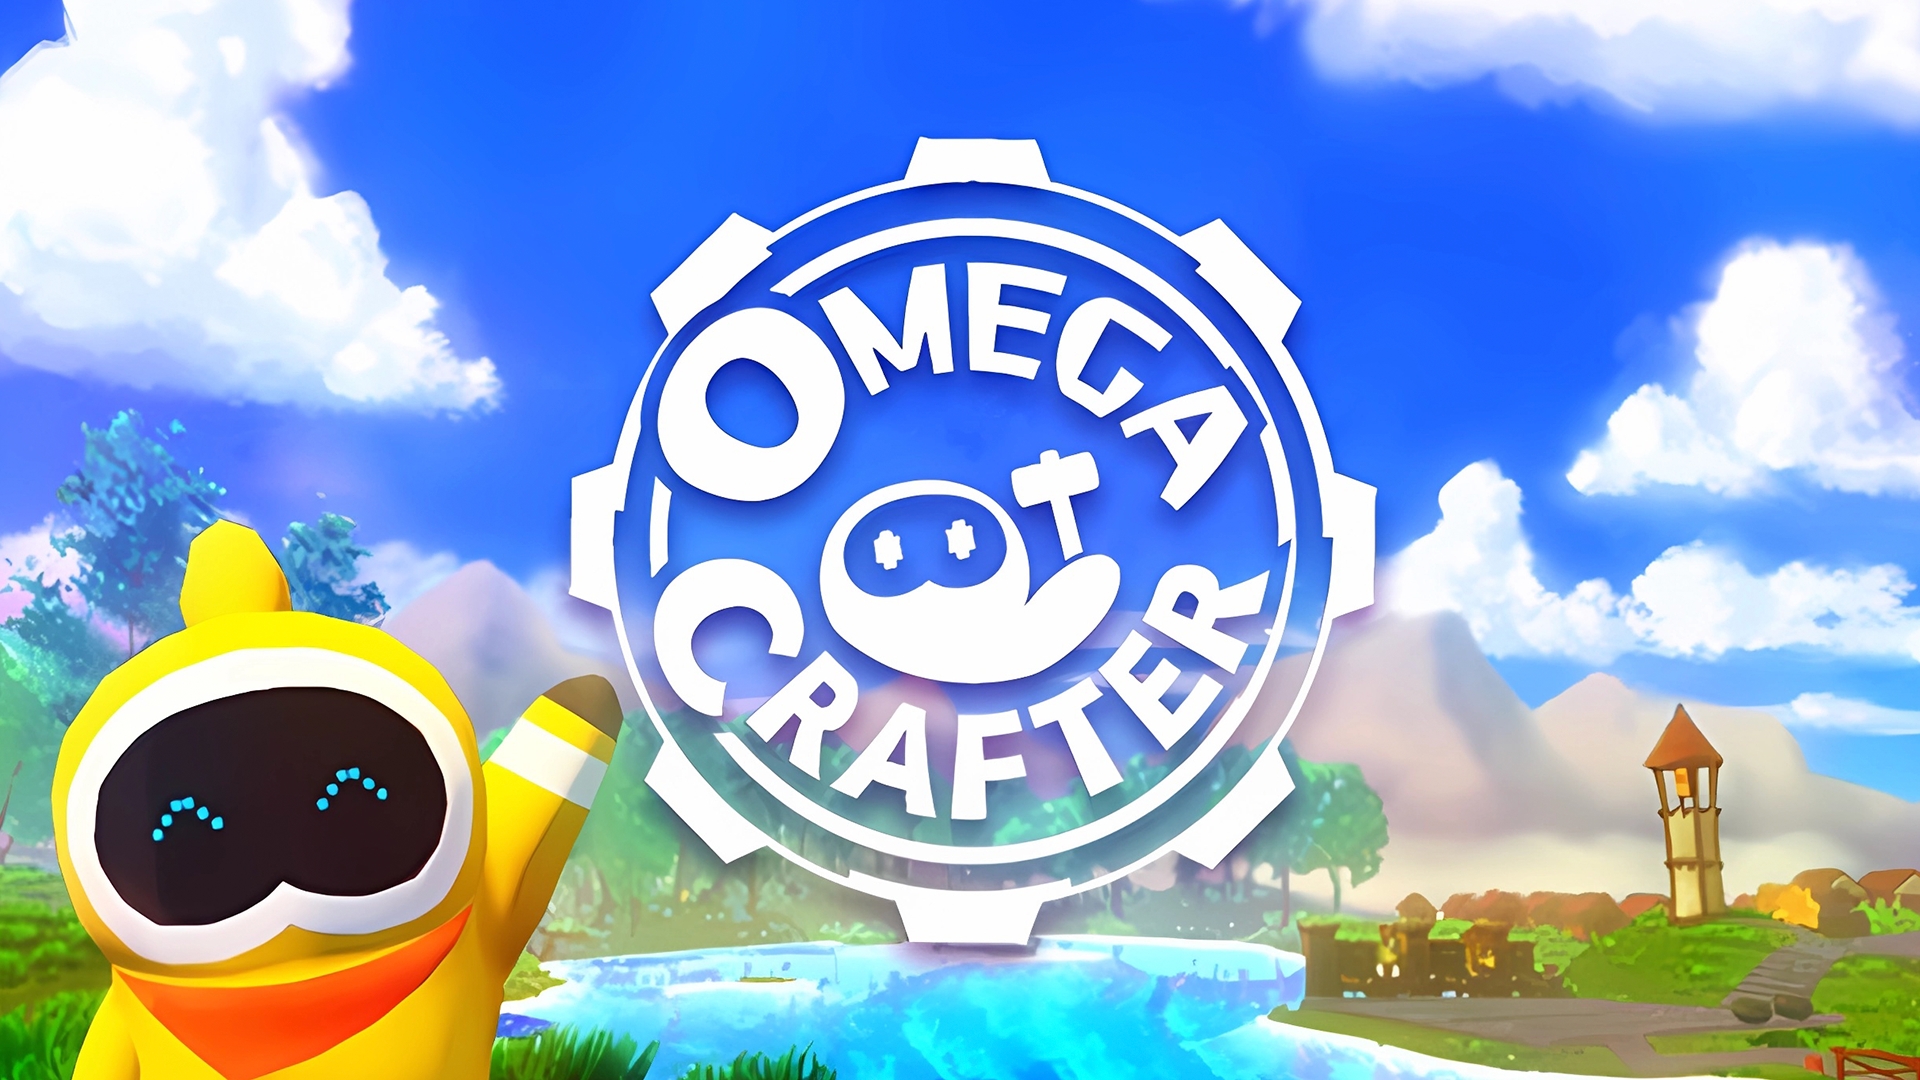 Buy Omega Crafter Steam